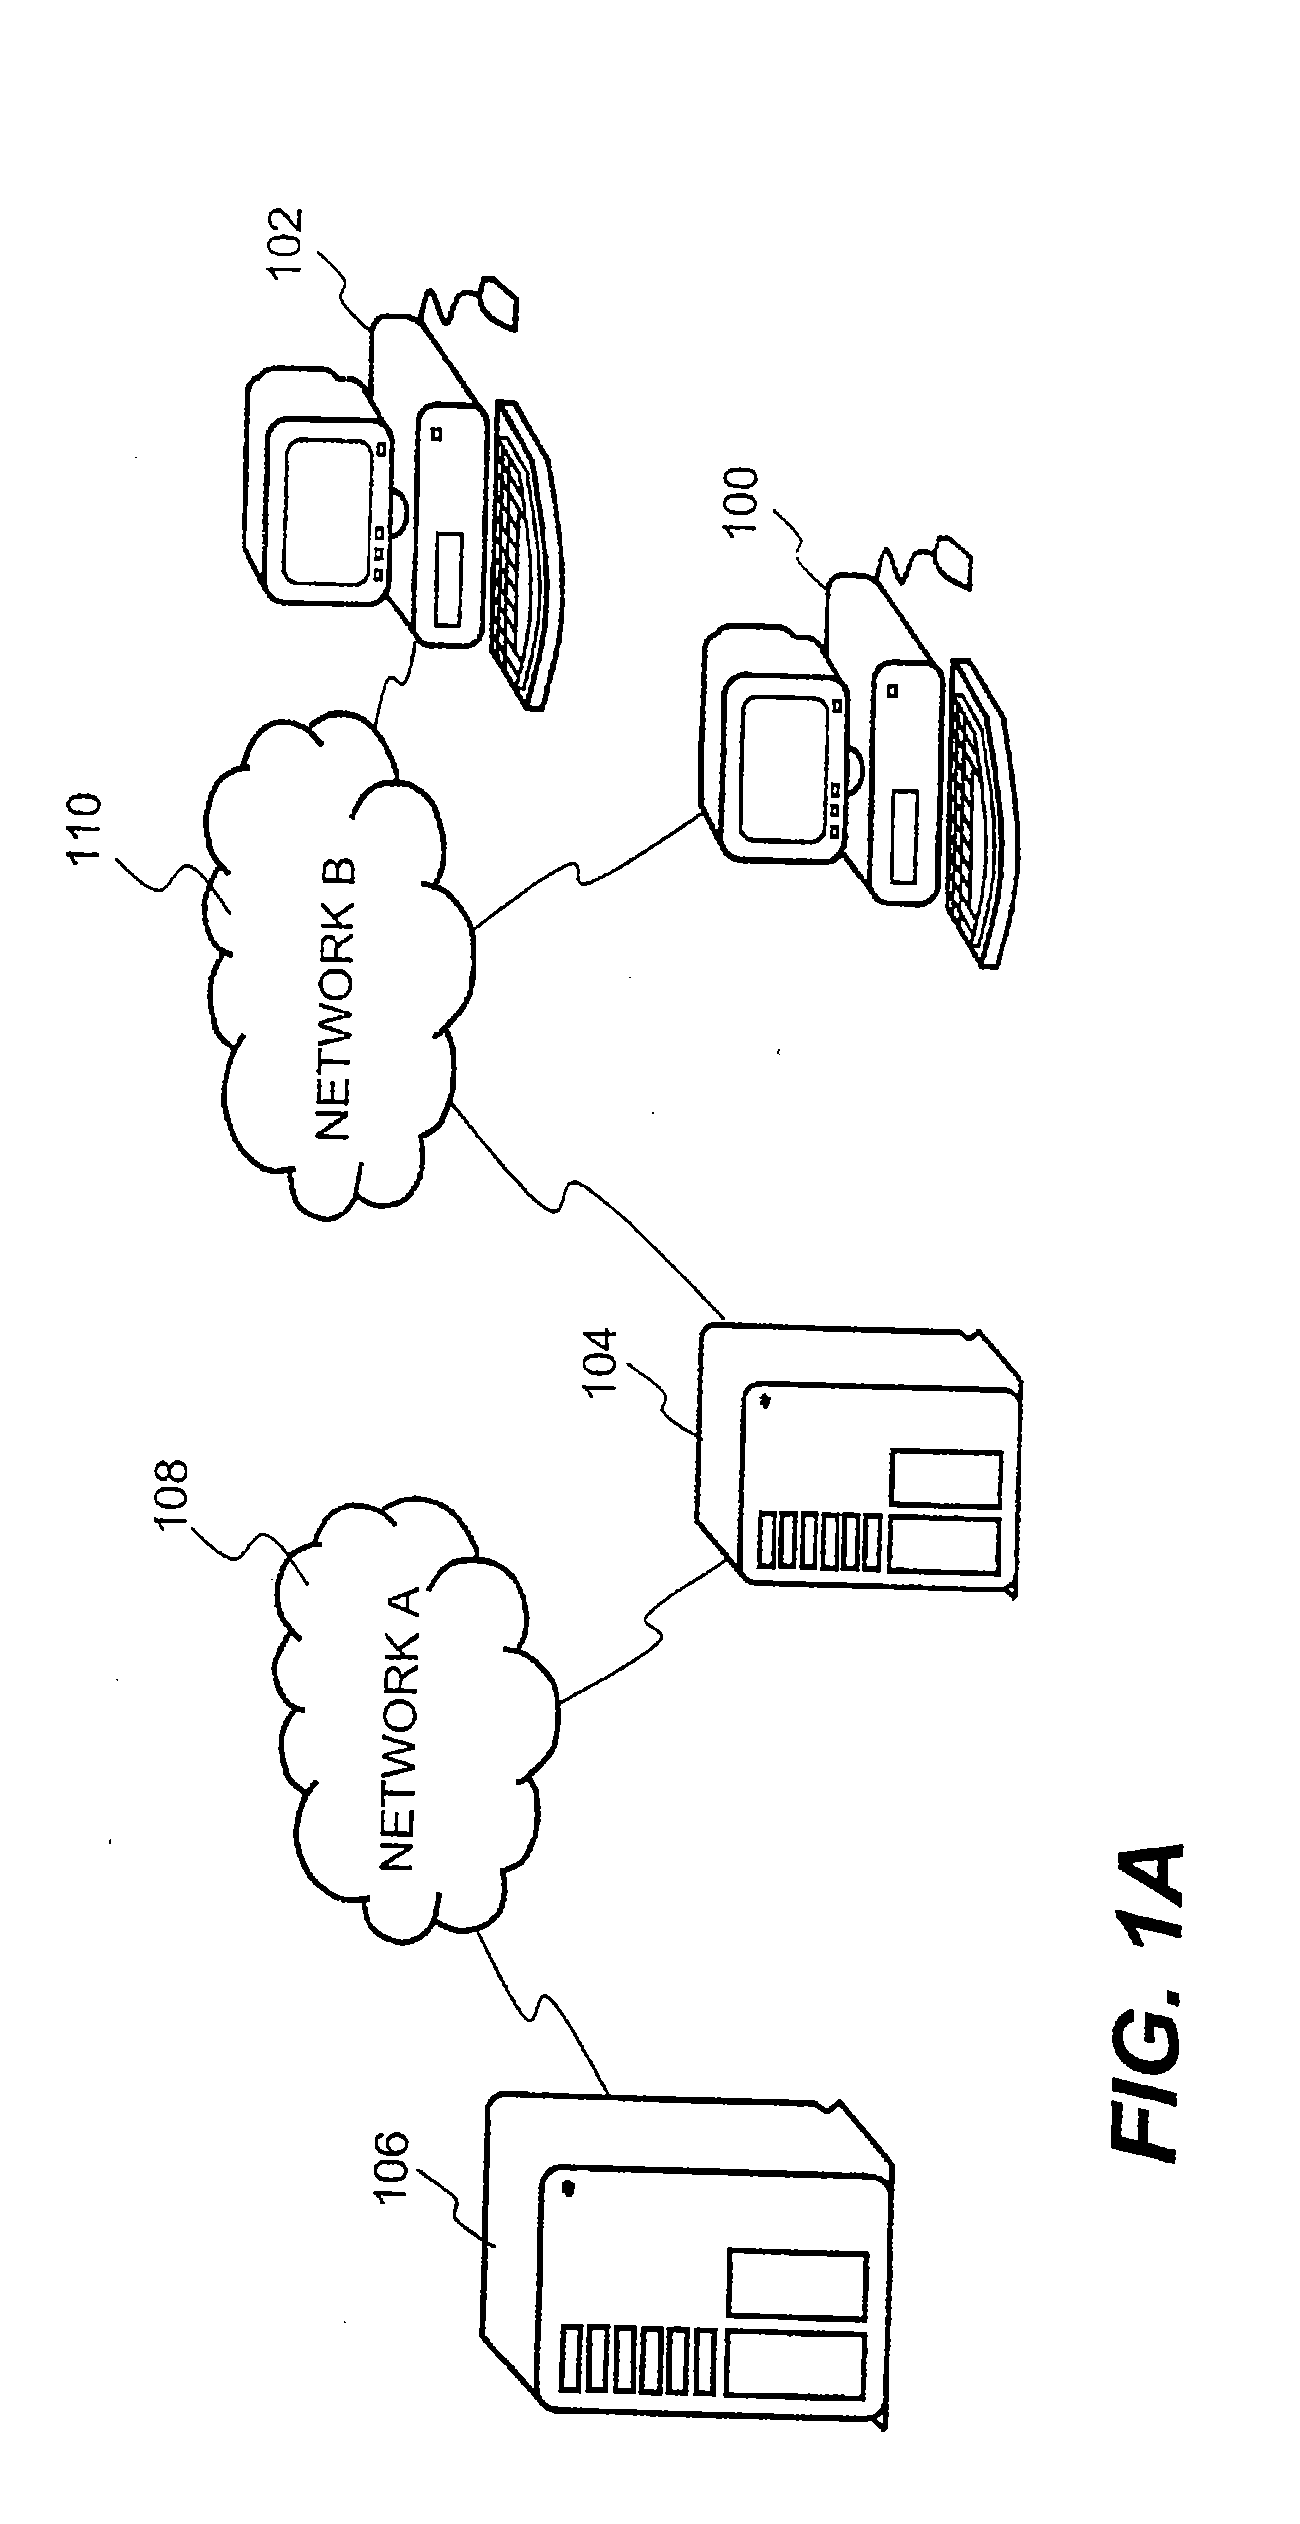 Methods and systems for providing access control to secured data